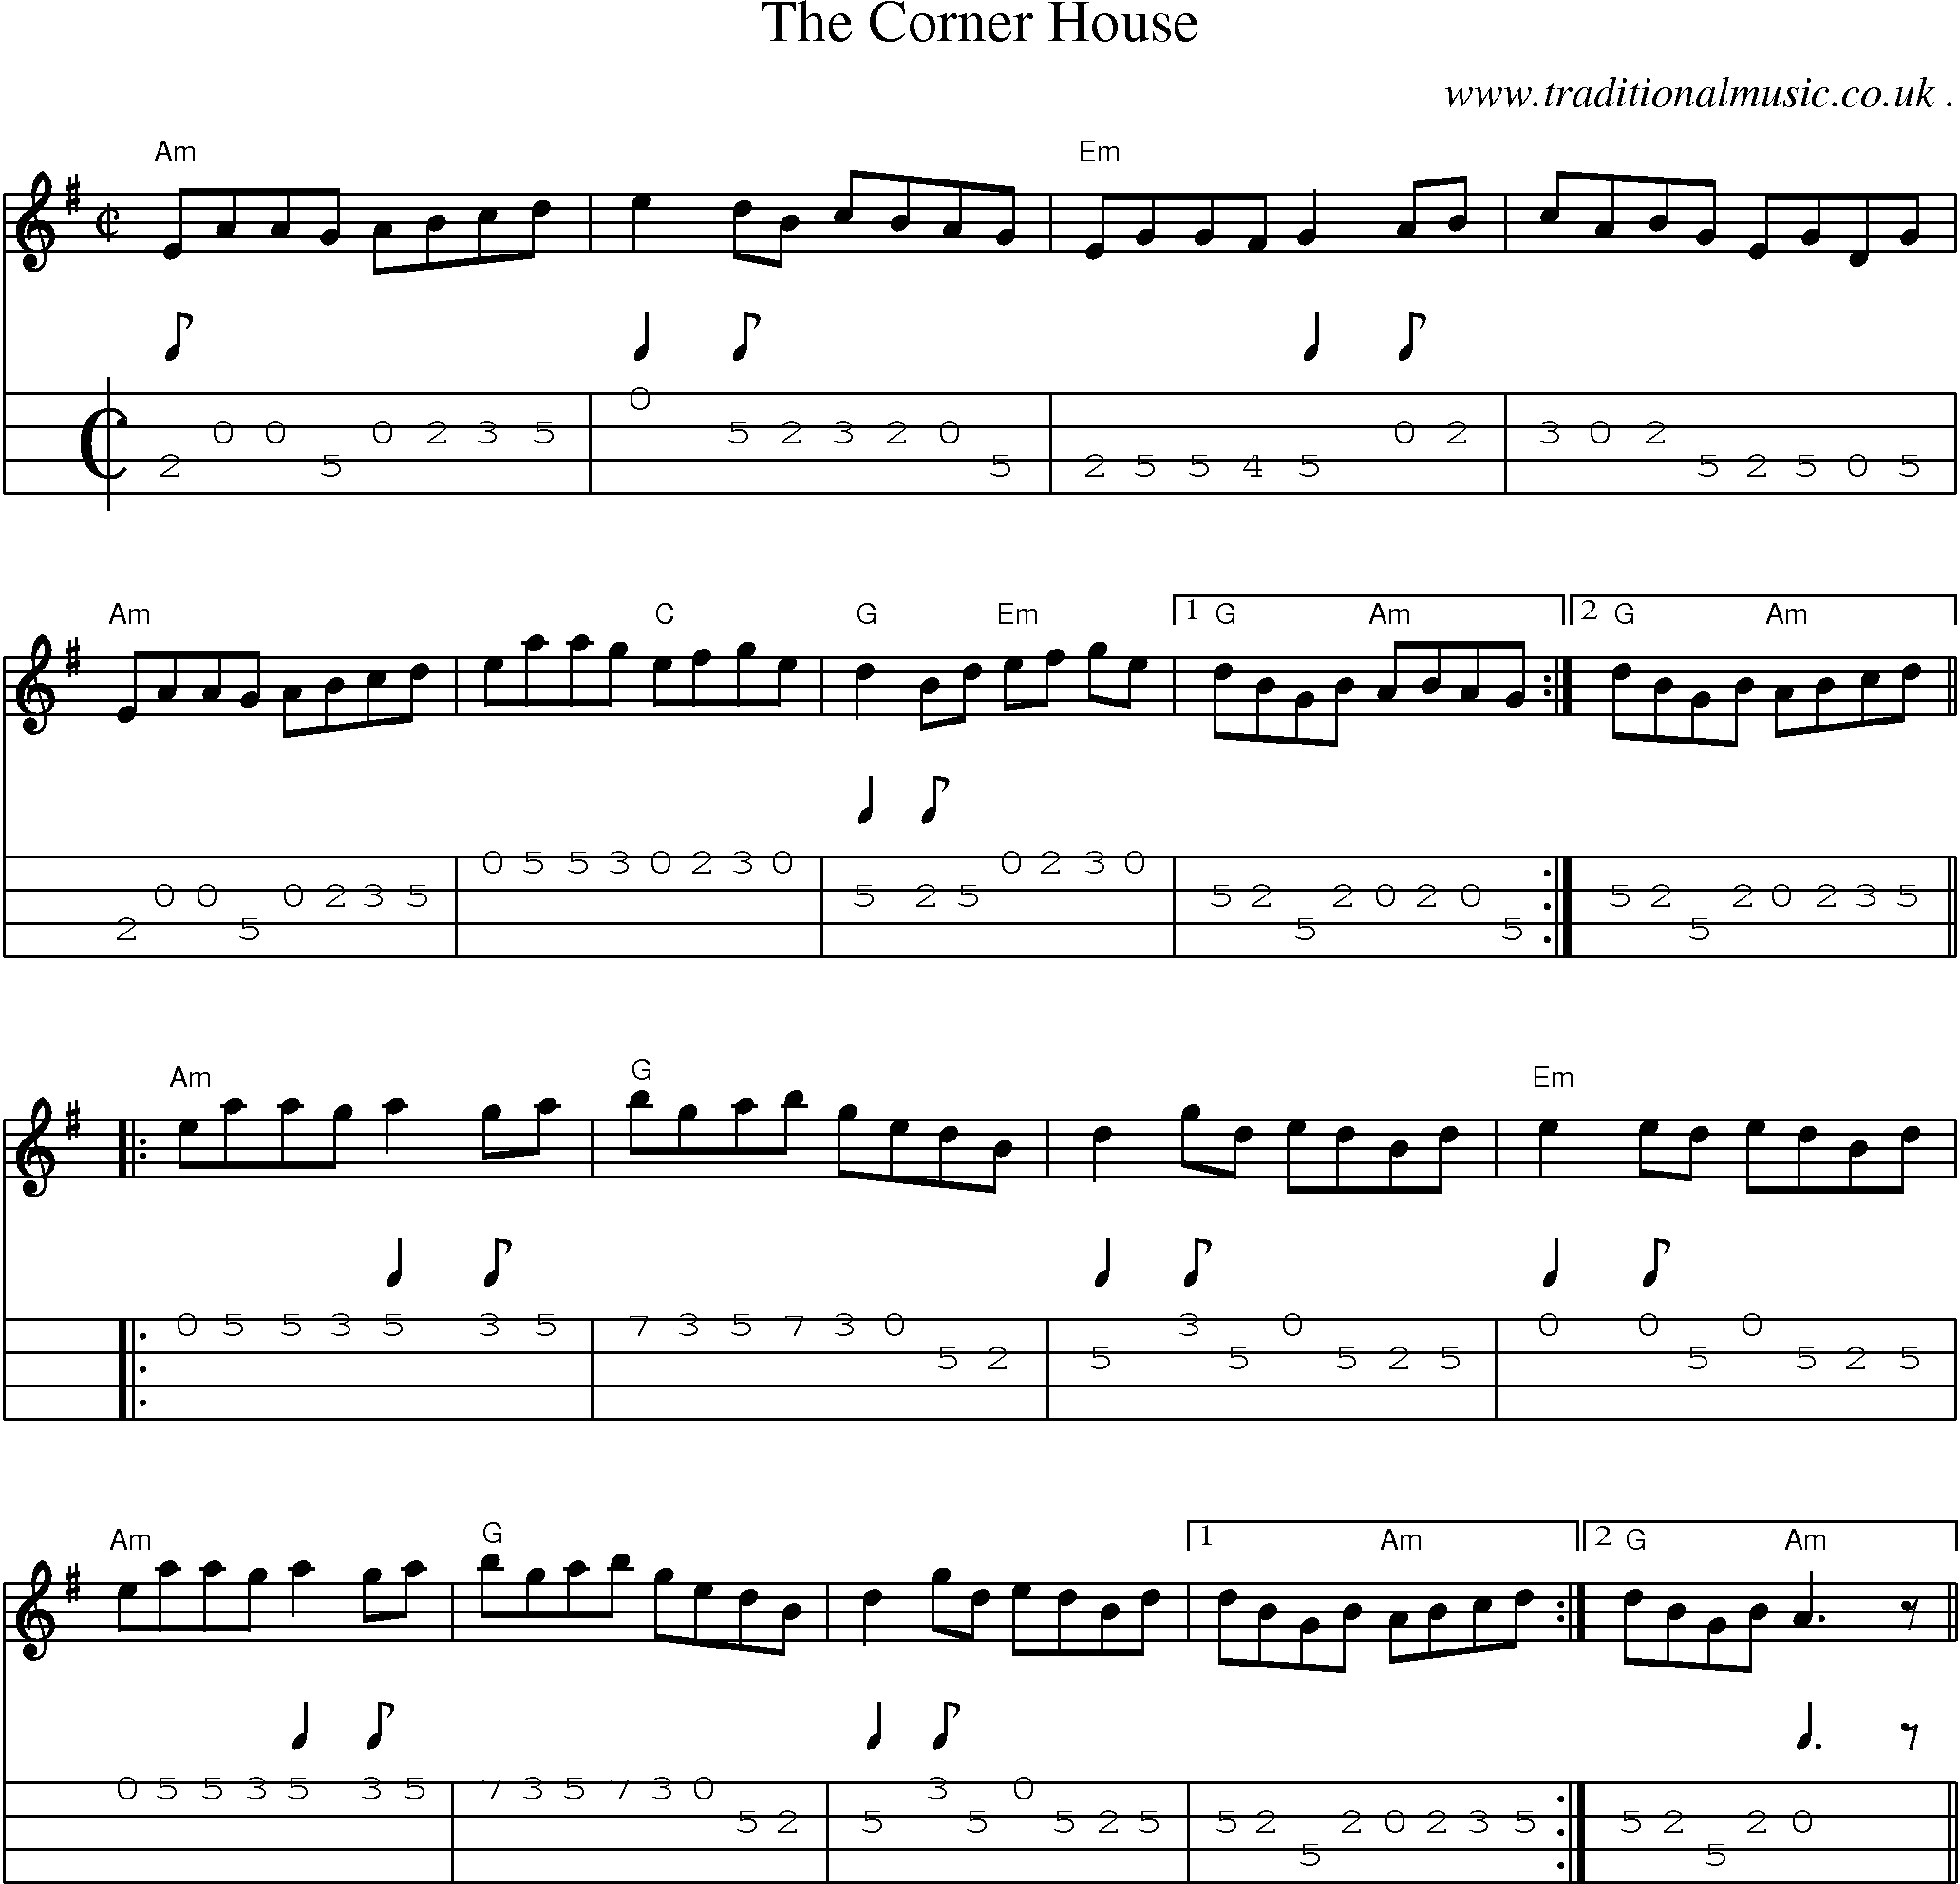 Music Score and Guitar Tabs for The Corner House